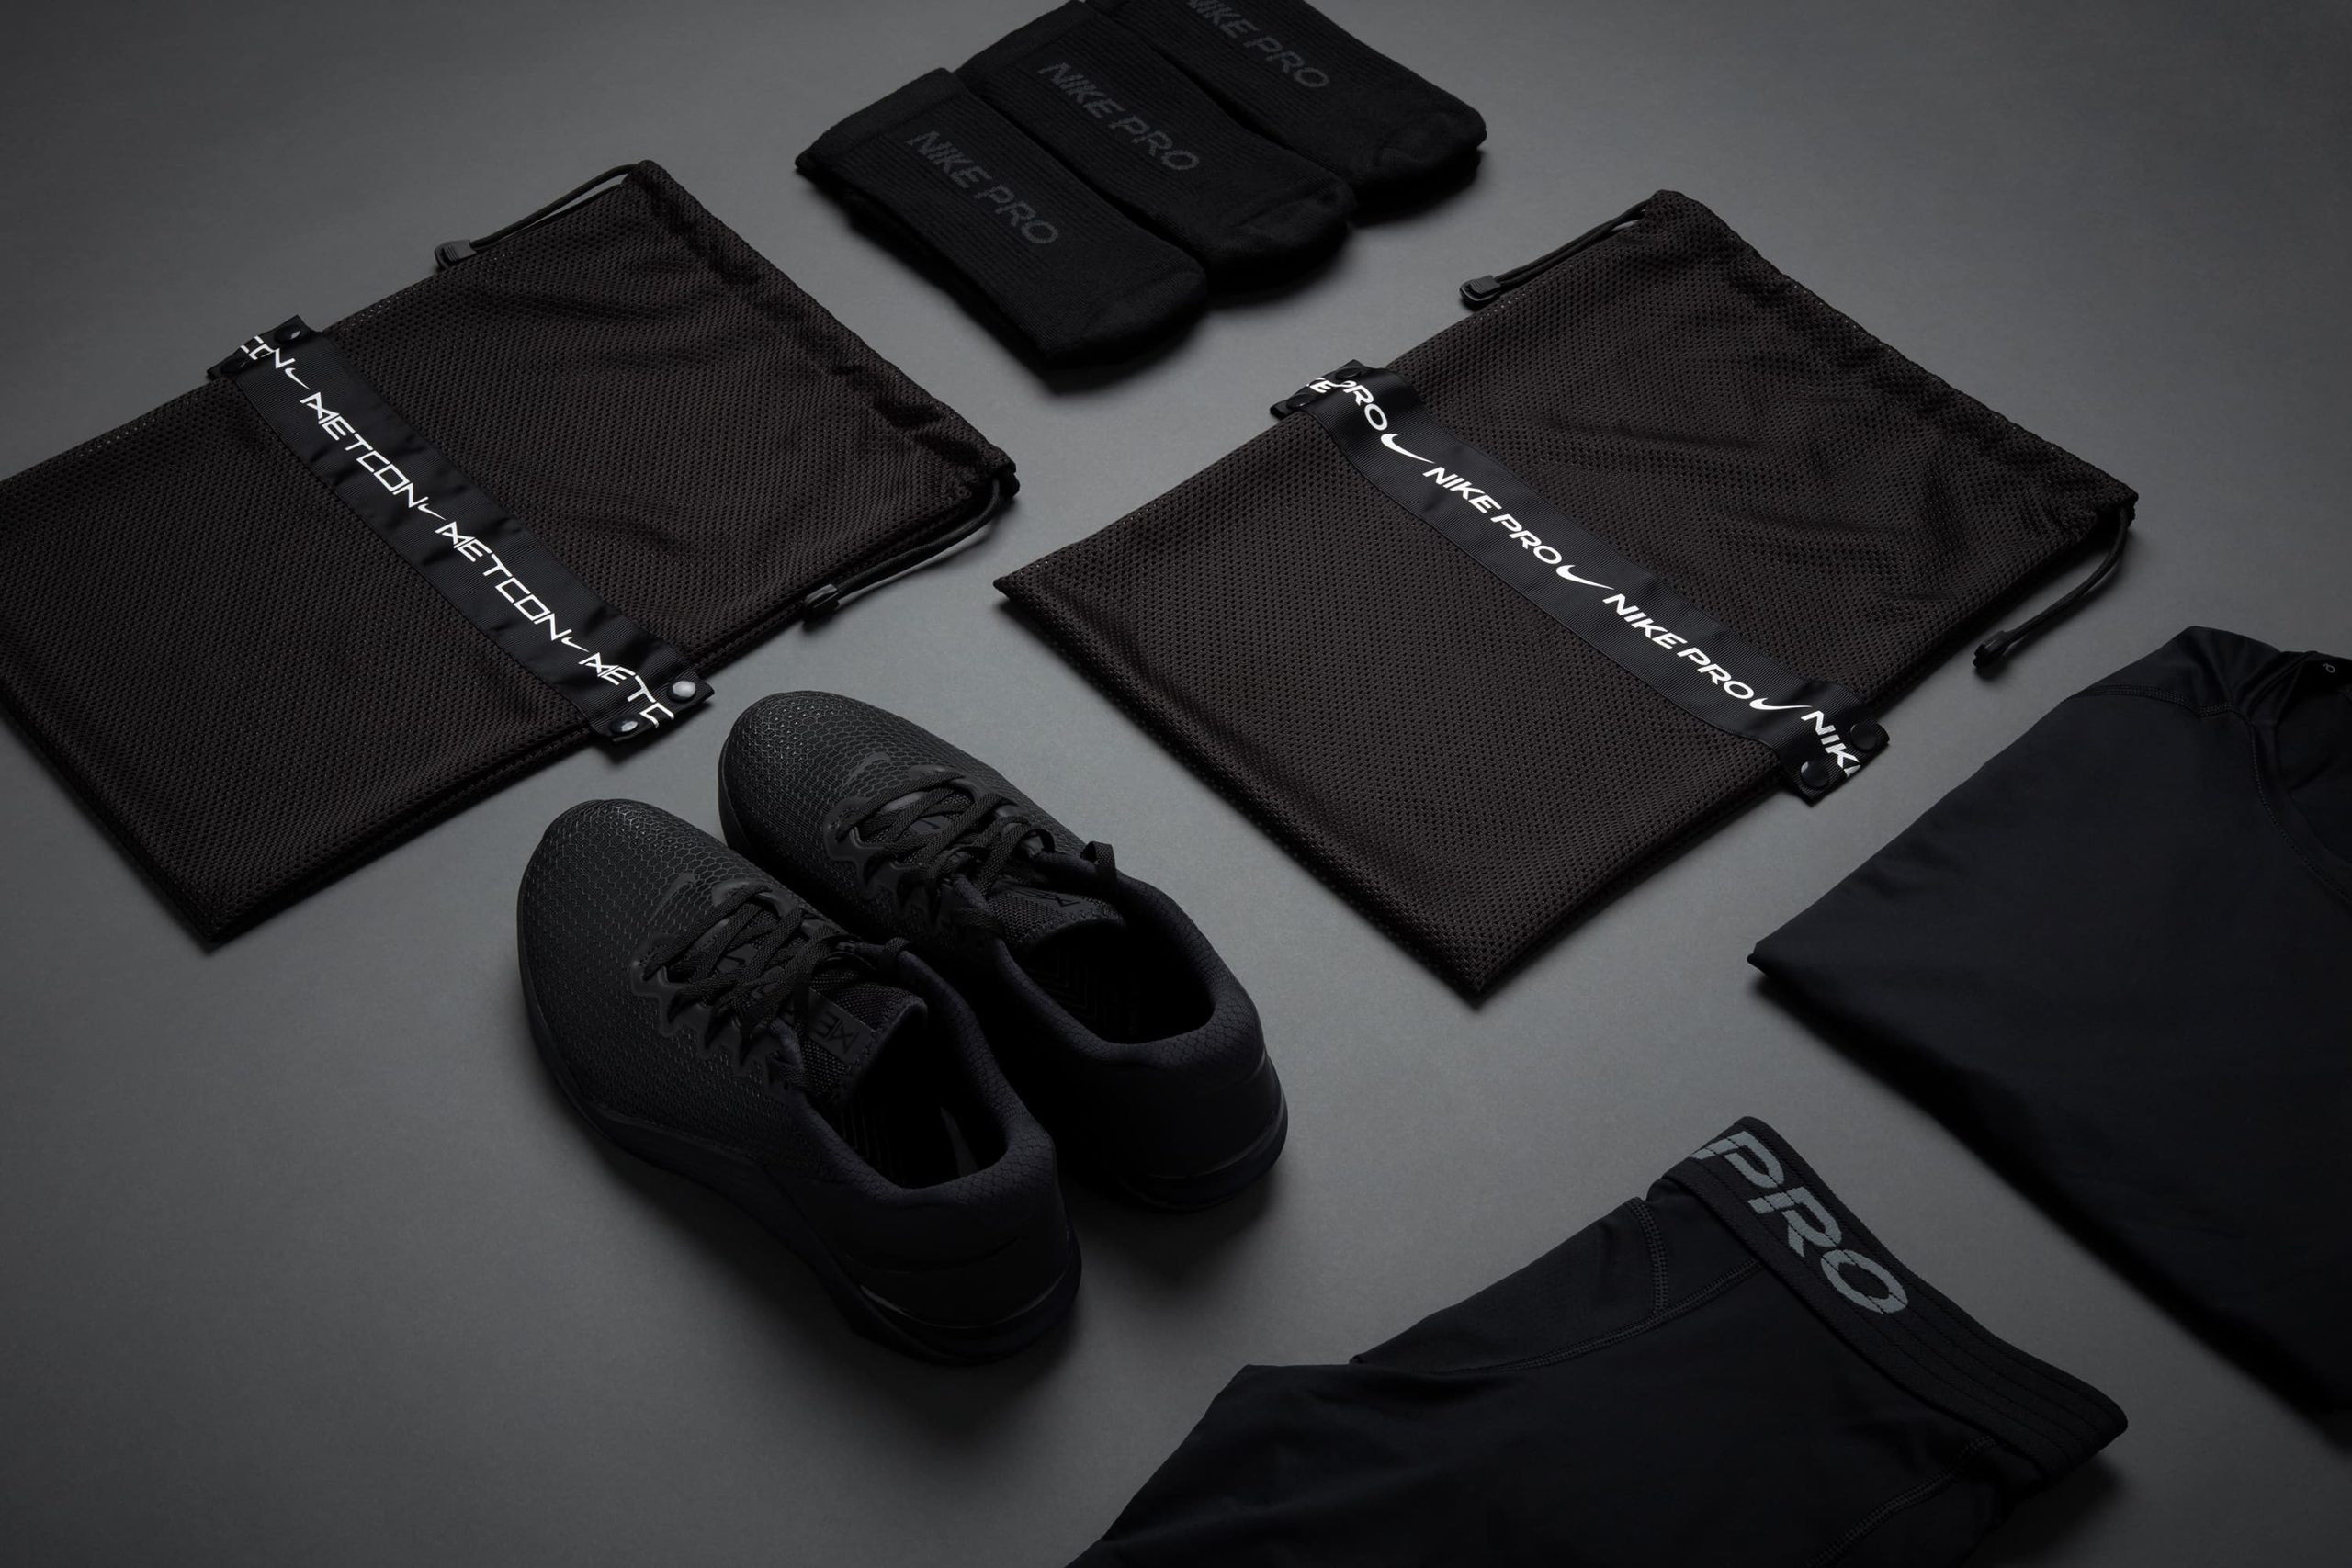 Photograph of the Nike Training pack complete with trainers and apparel.